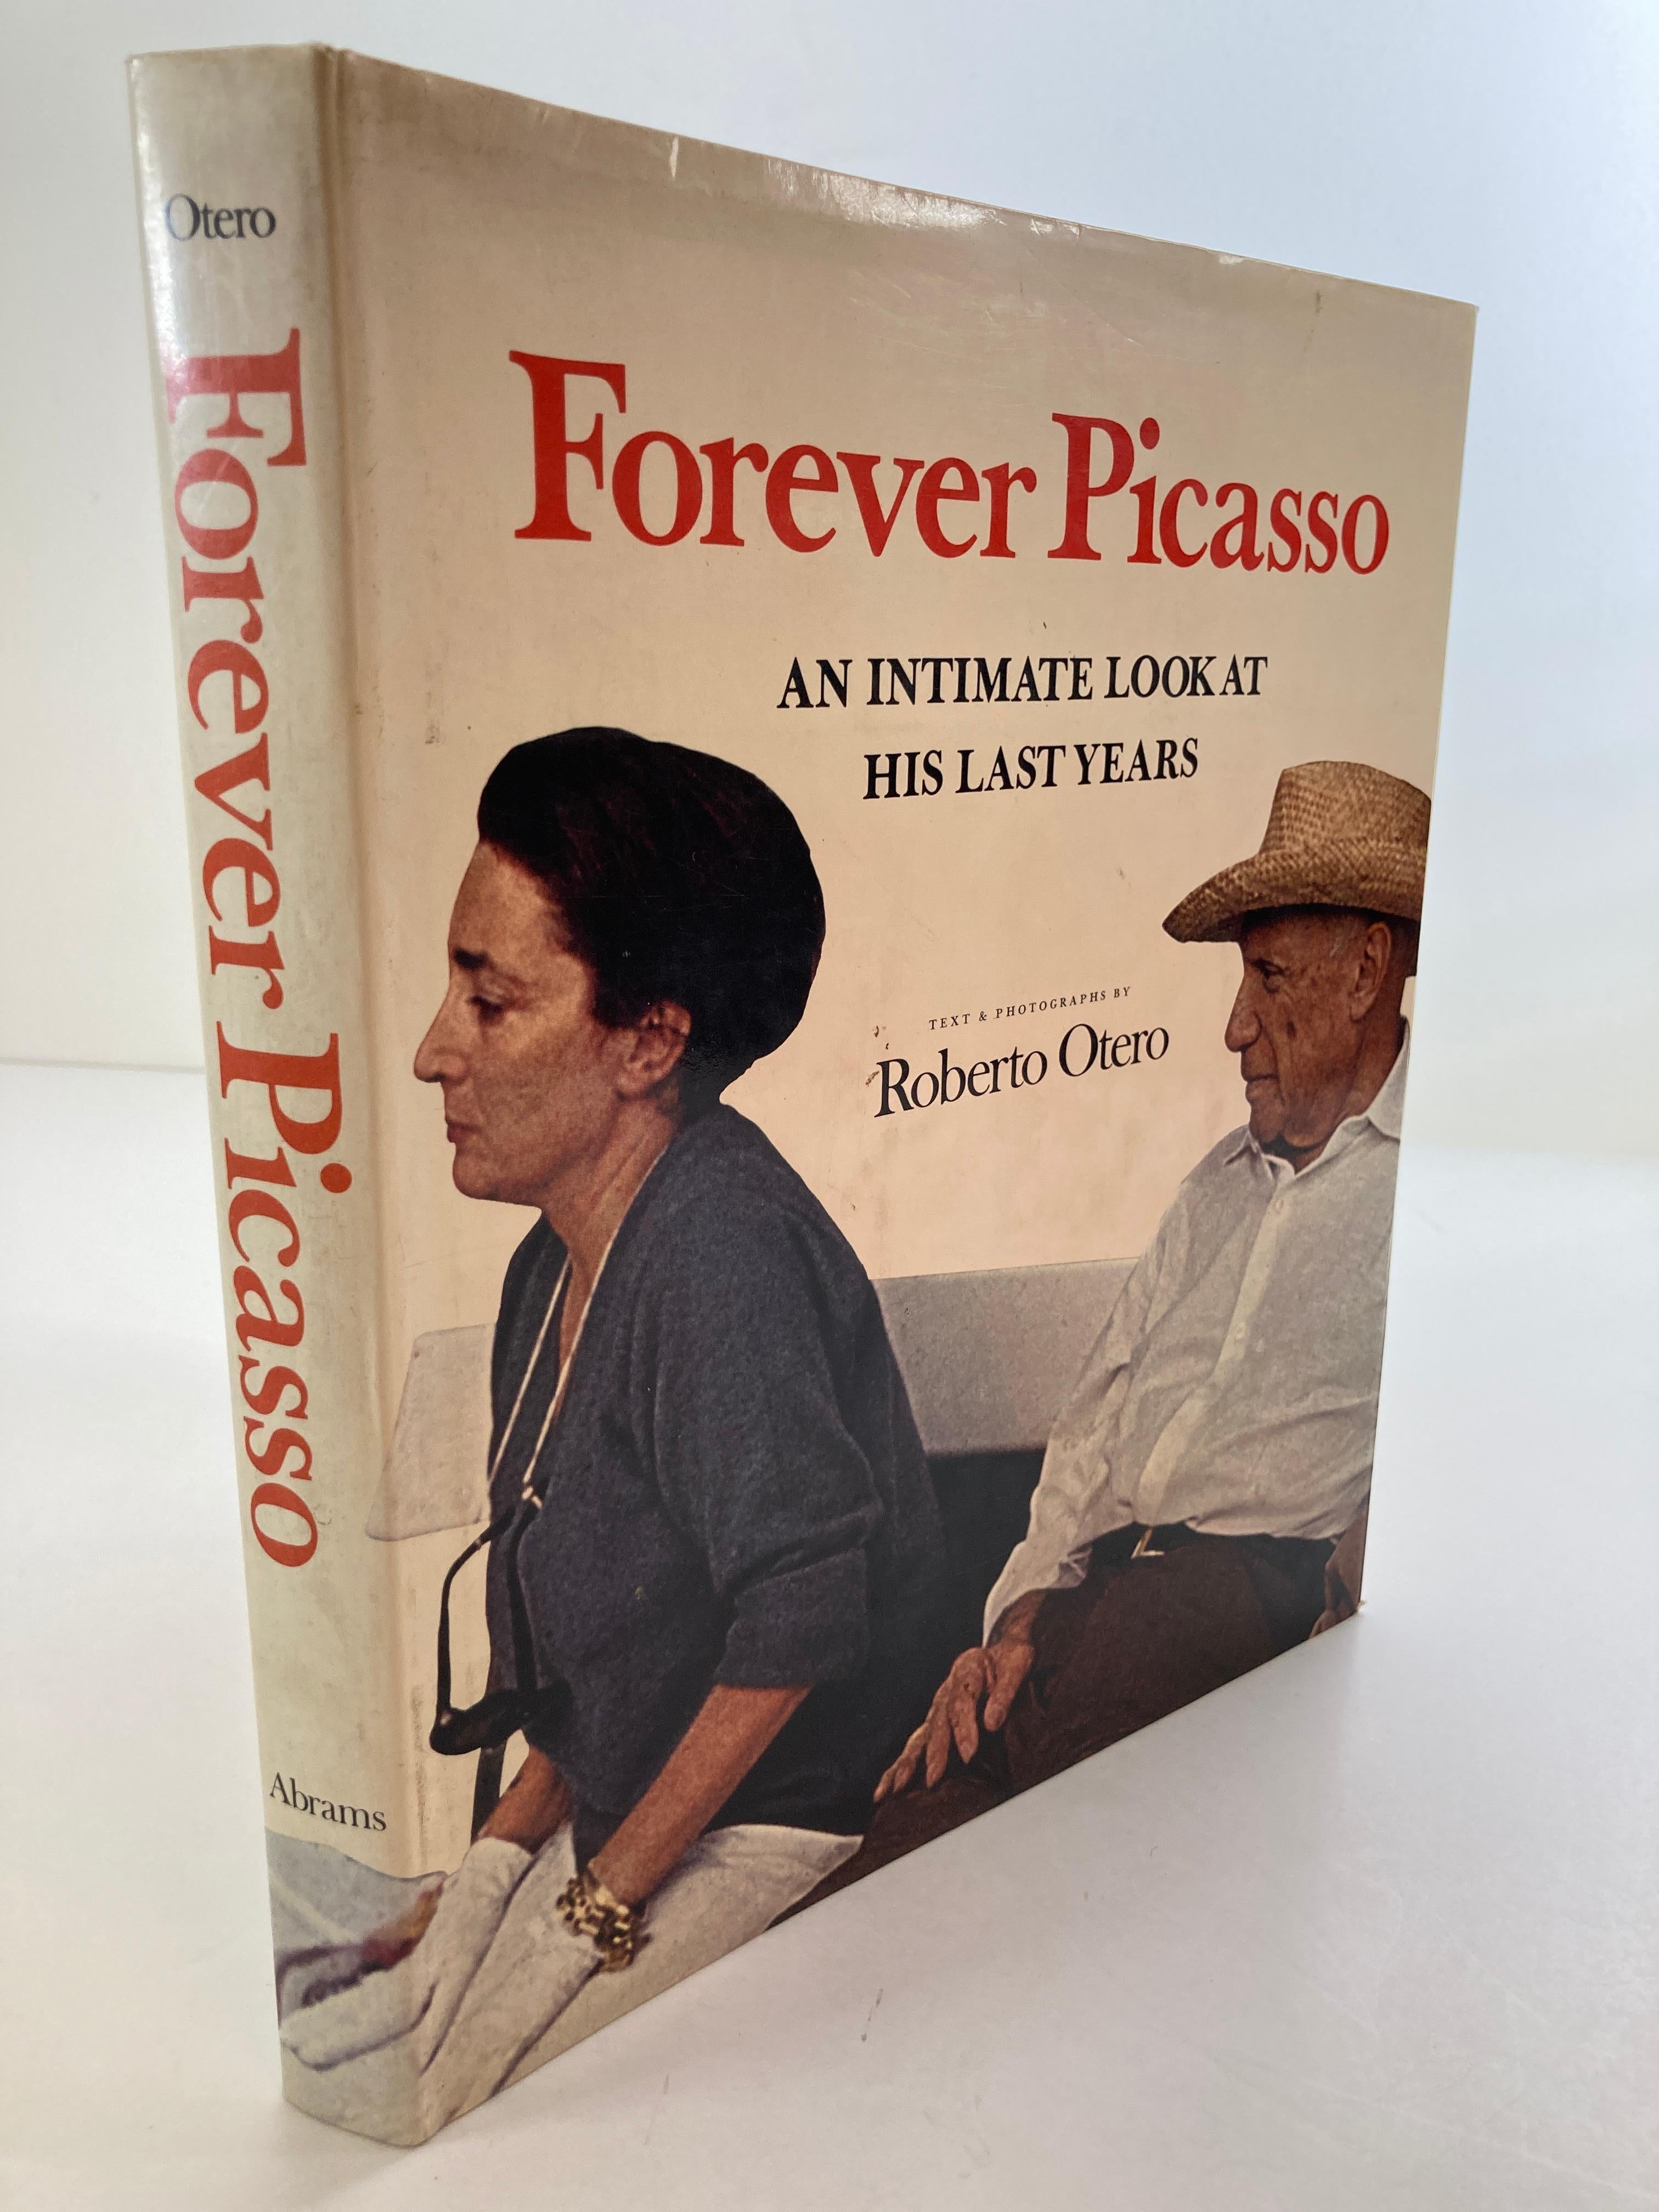 Spanish Forever Picasso An Intimate Look at His Last Years Book by Roberto Otero